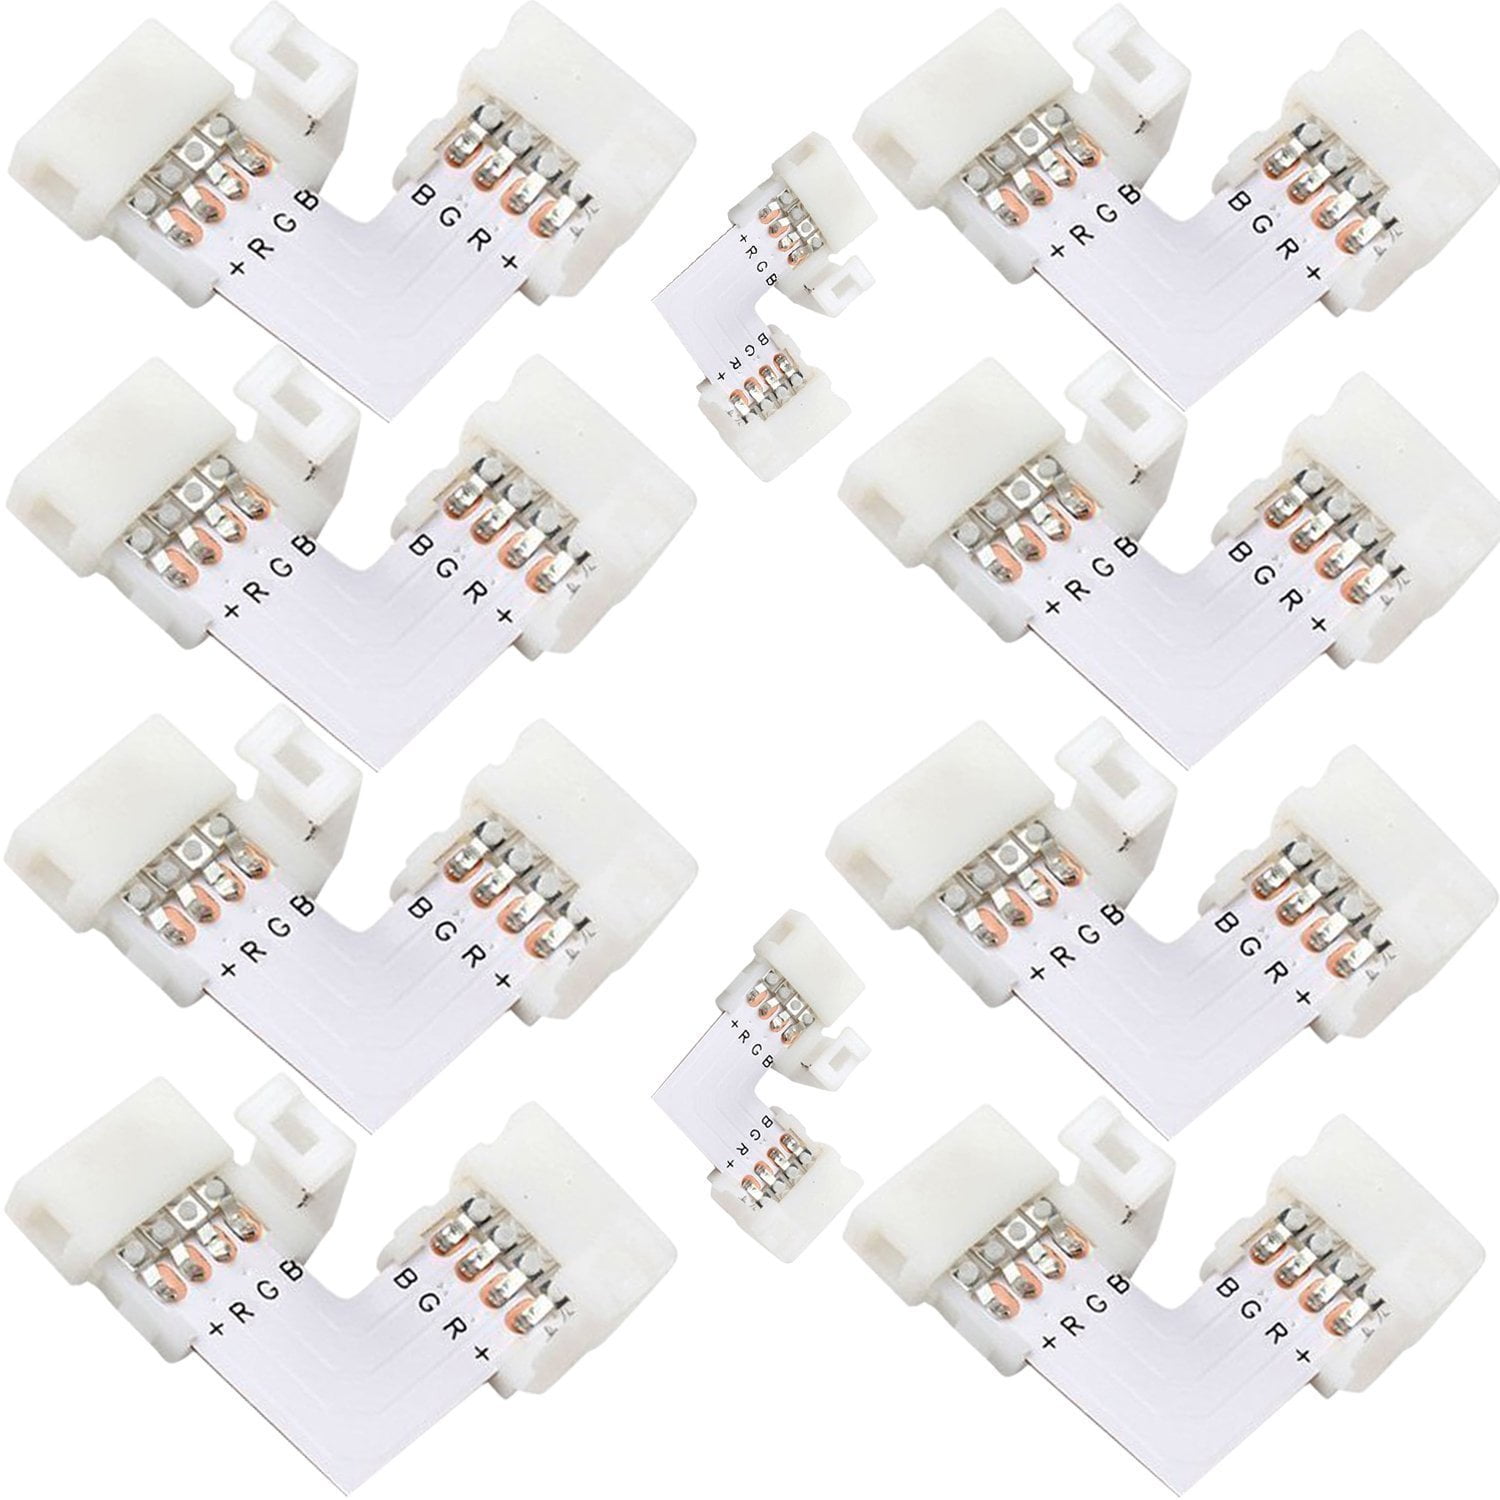 20-200PCS 4Pin Male Plug Adapter Connector for RGB 3528 5050 LED Strip Light 